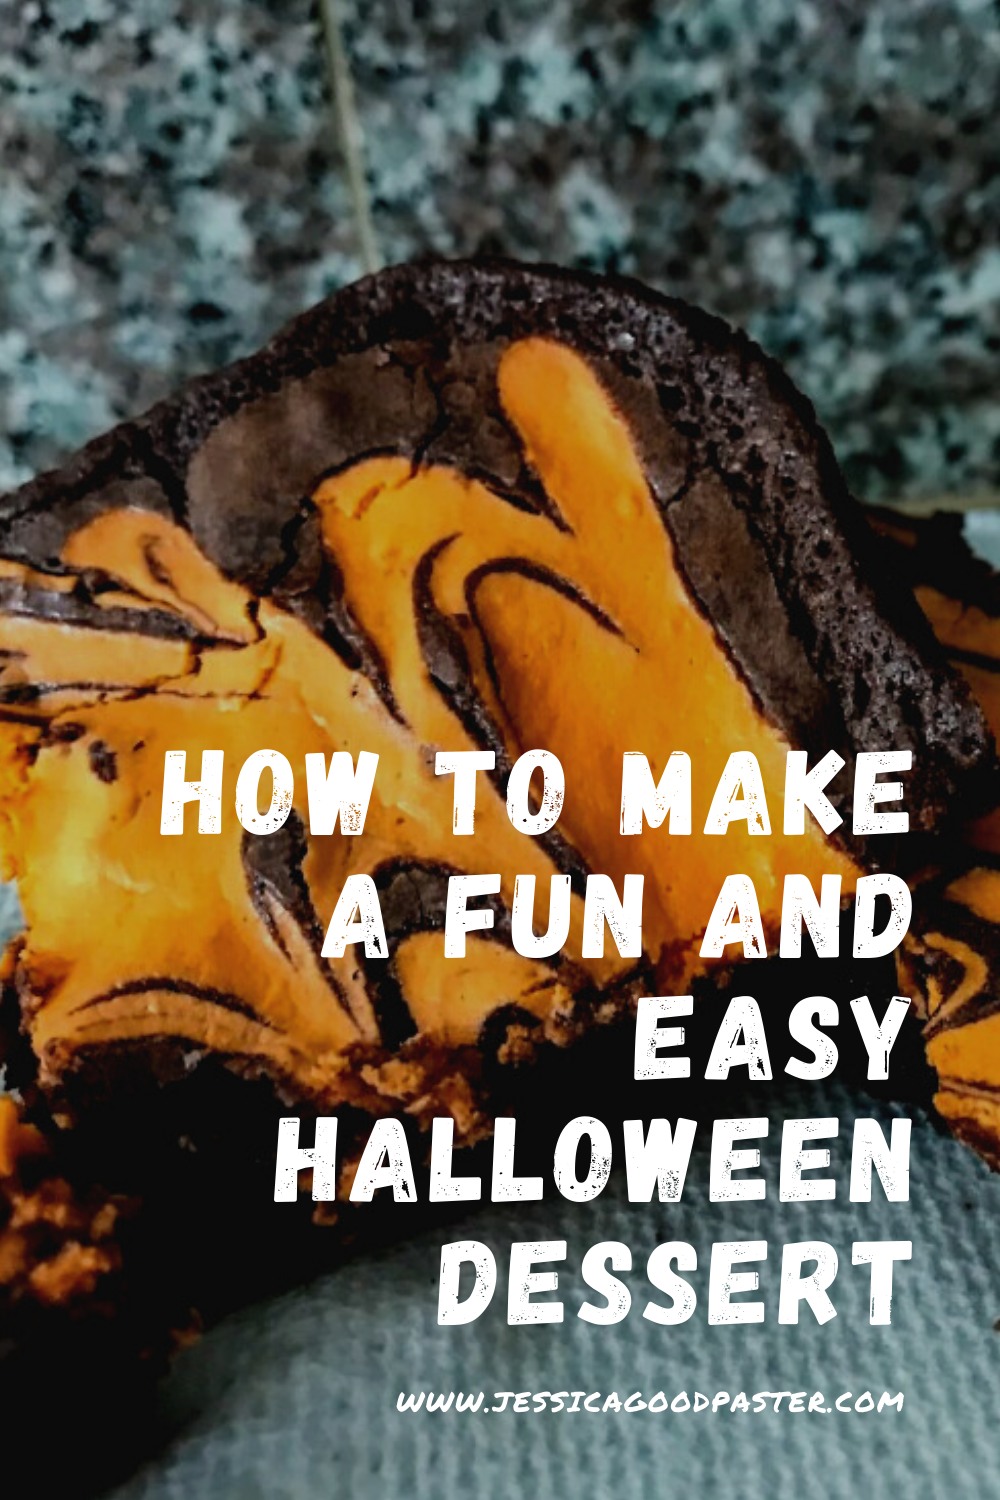 How to Make a Fun and Easy Halloween Dessert | These Halloween-themed cheesecake brownies are a simple and easy dessert for kids, adults, and parties! It only takes a few minutes and ingredients to make a batch of these chocolate Halloween treats. #Halloween #Halloweendesserts #brownies #easyrecipe #halloweenparty